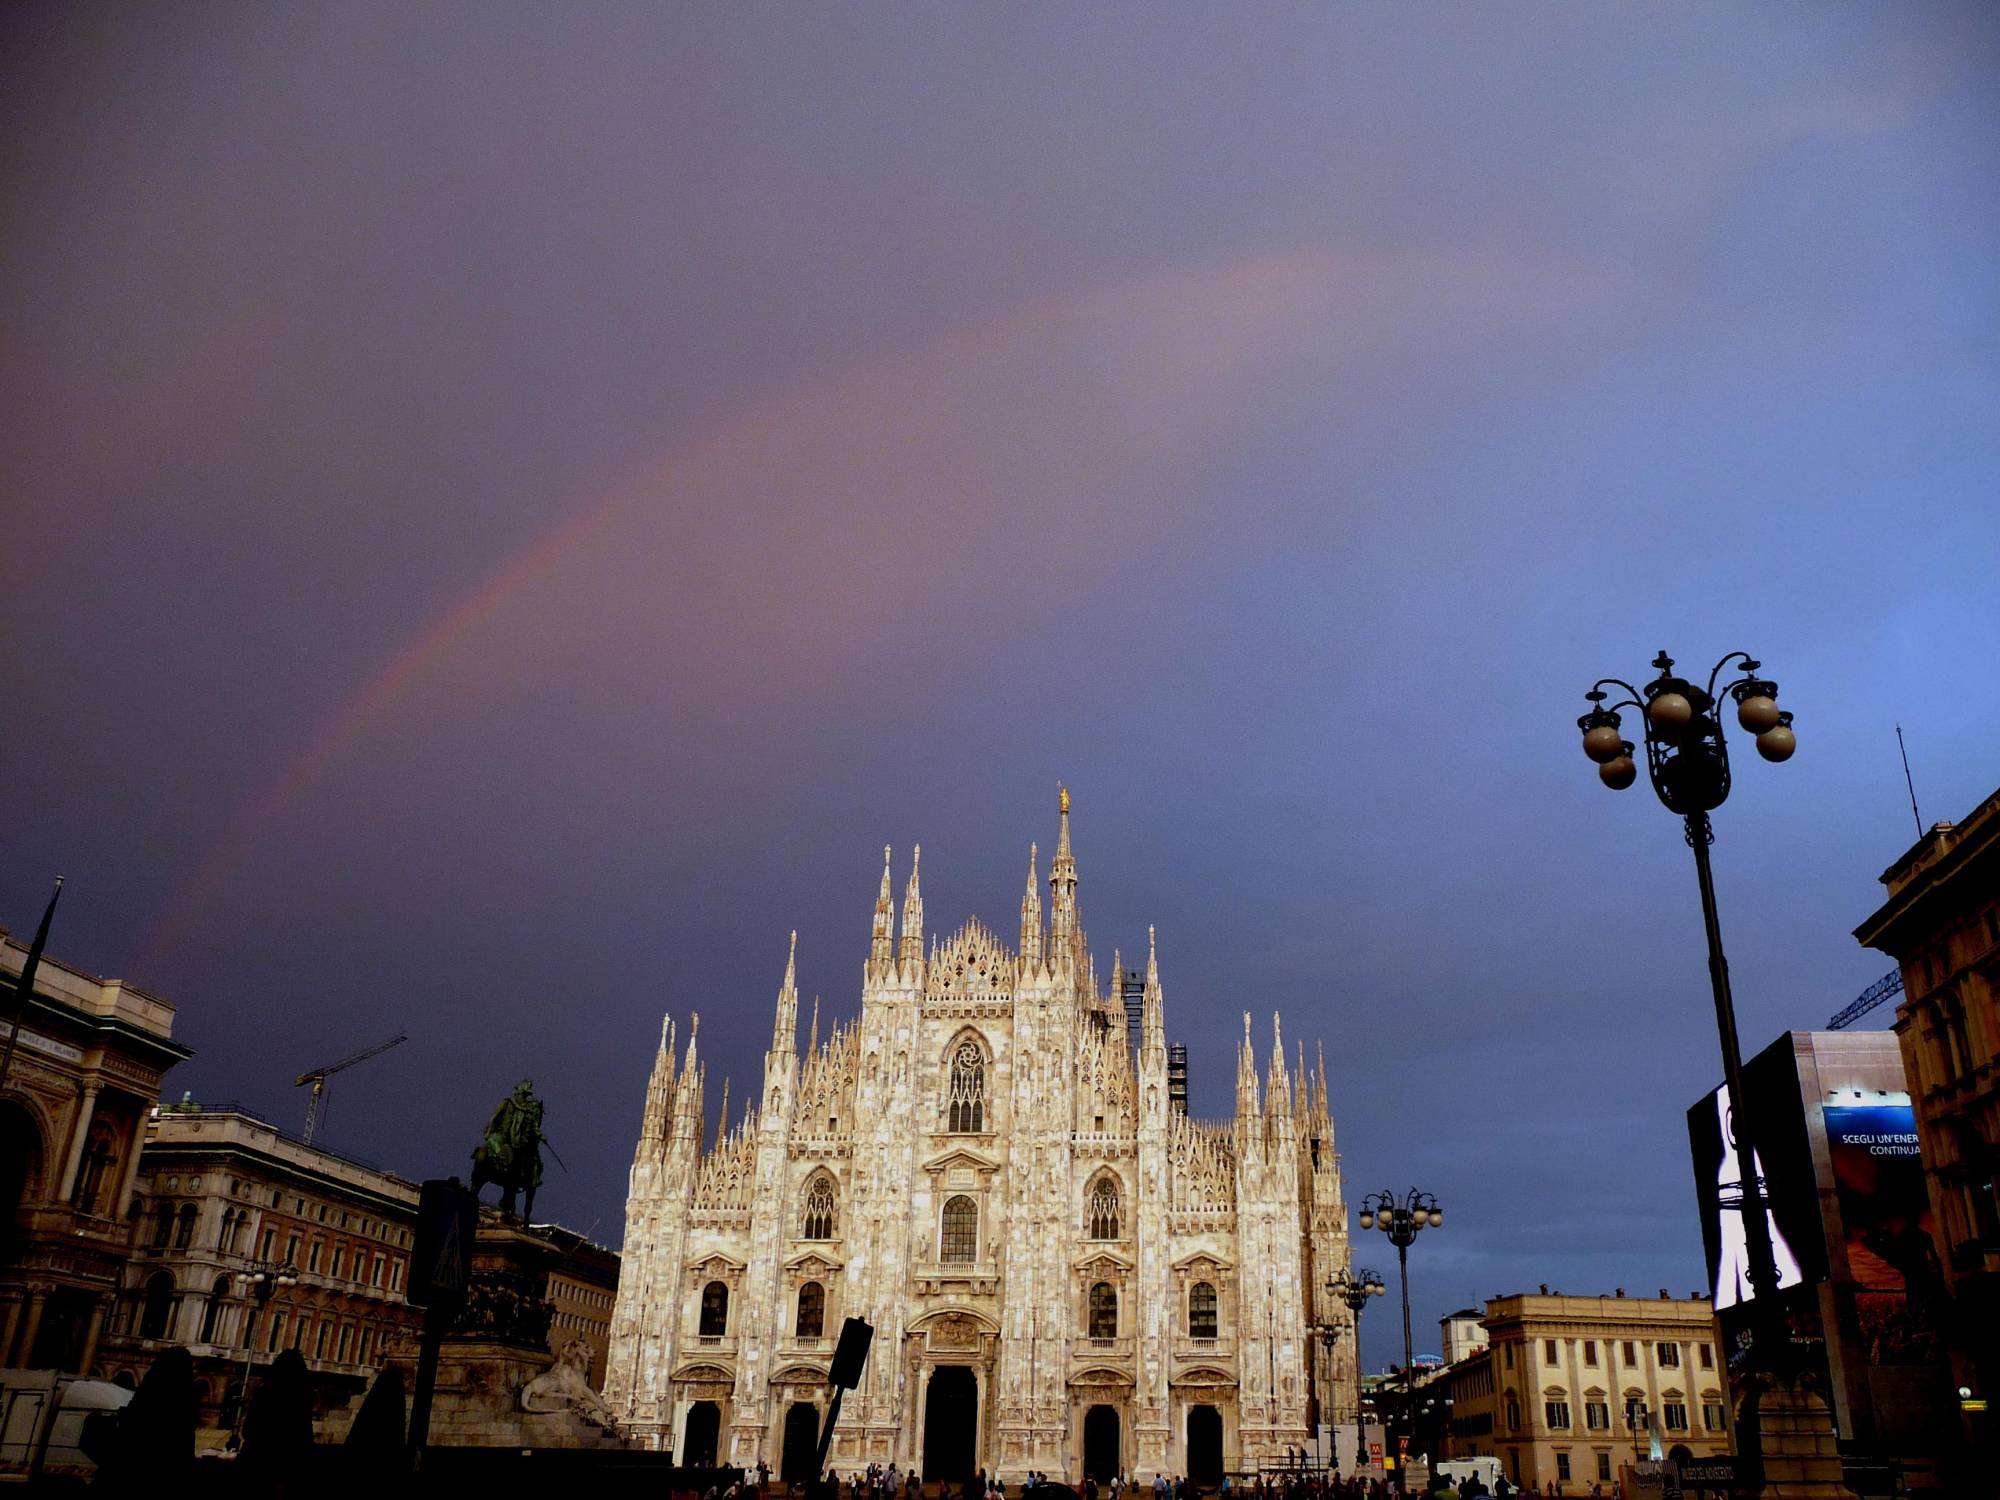 Double rainbow over Duomo of Milan: 263 KB; click on the image to enlarge